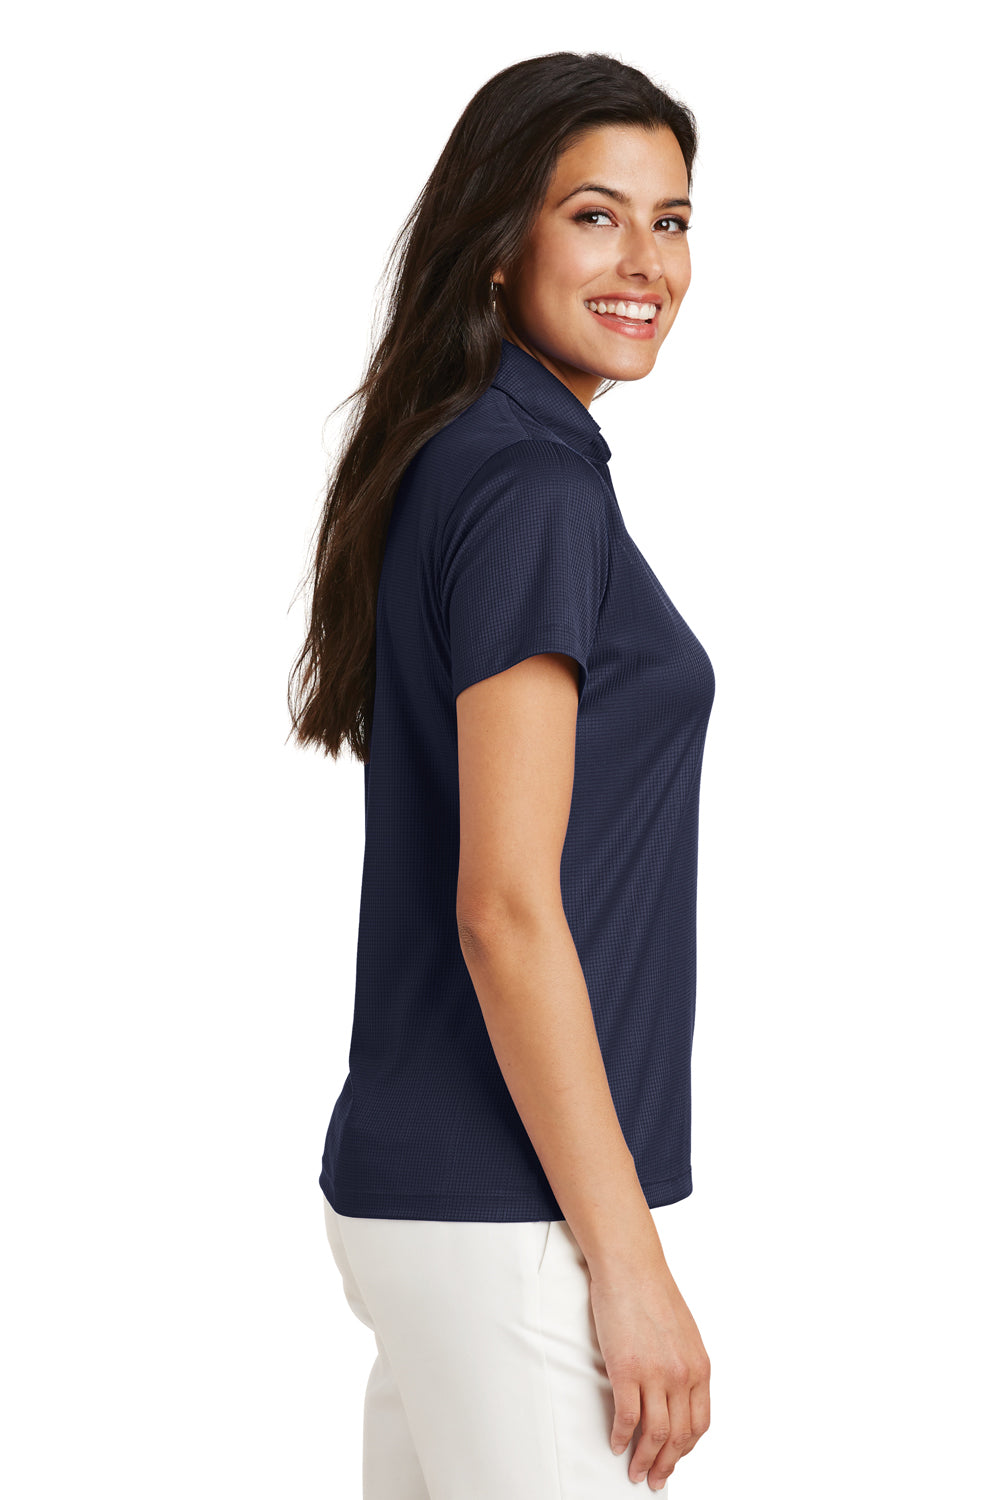 Port Authority L528 Womens Performance Moisture Wicking Short Sleeve Polo Shirt Navy Blue Side